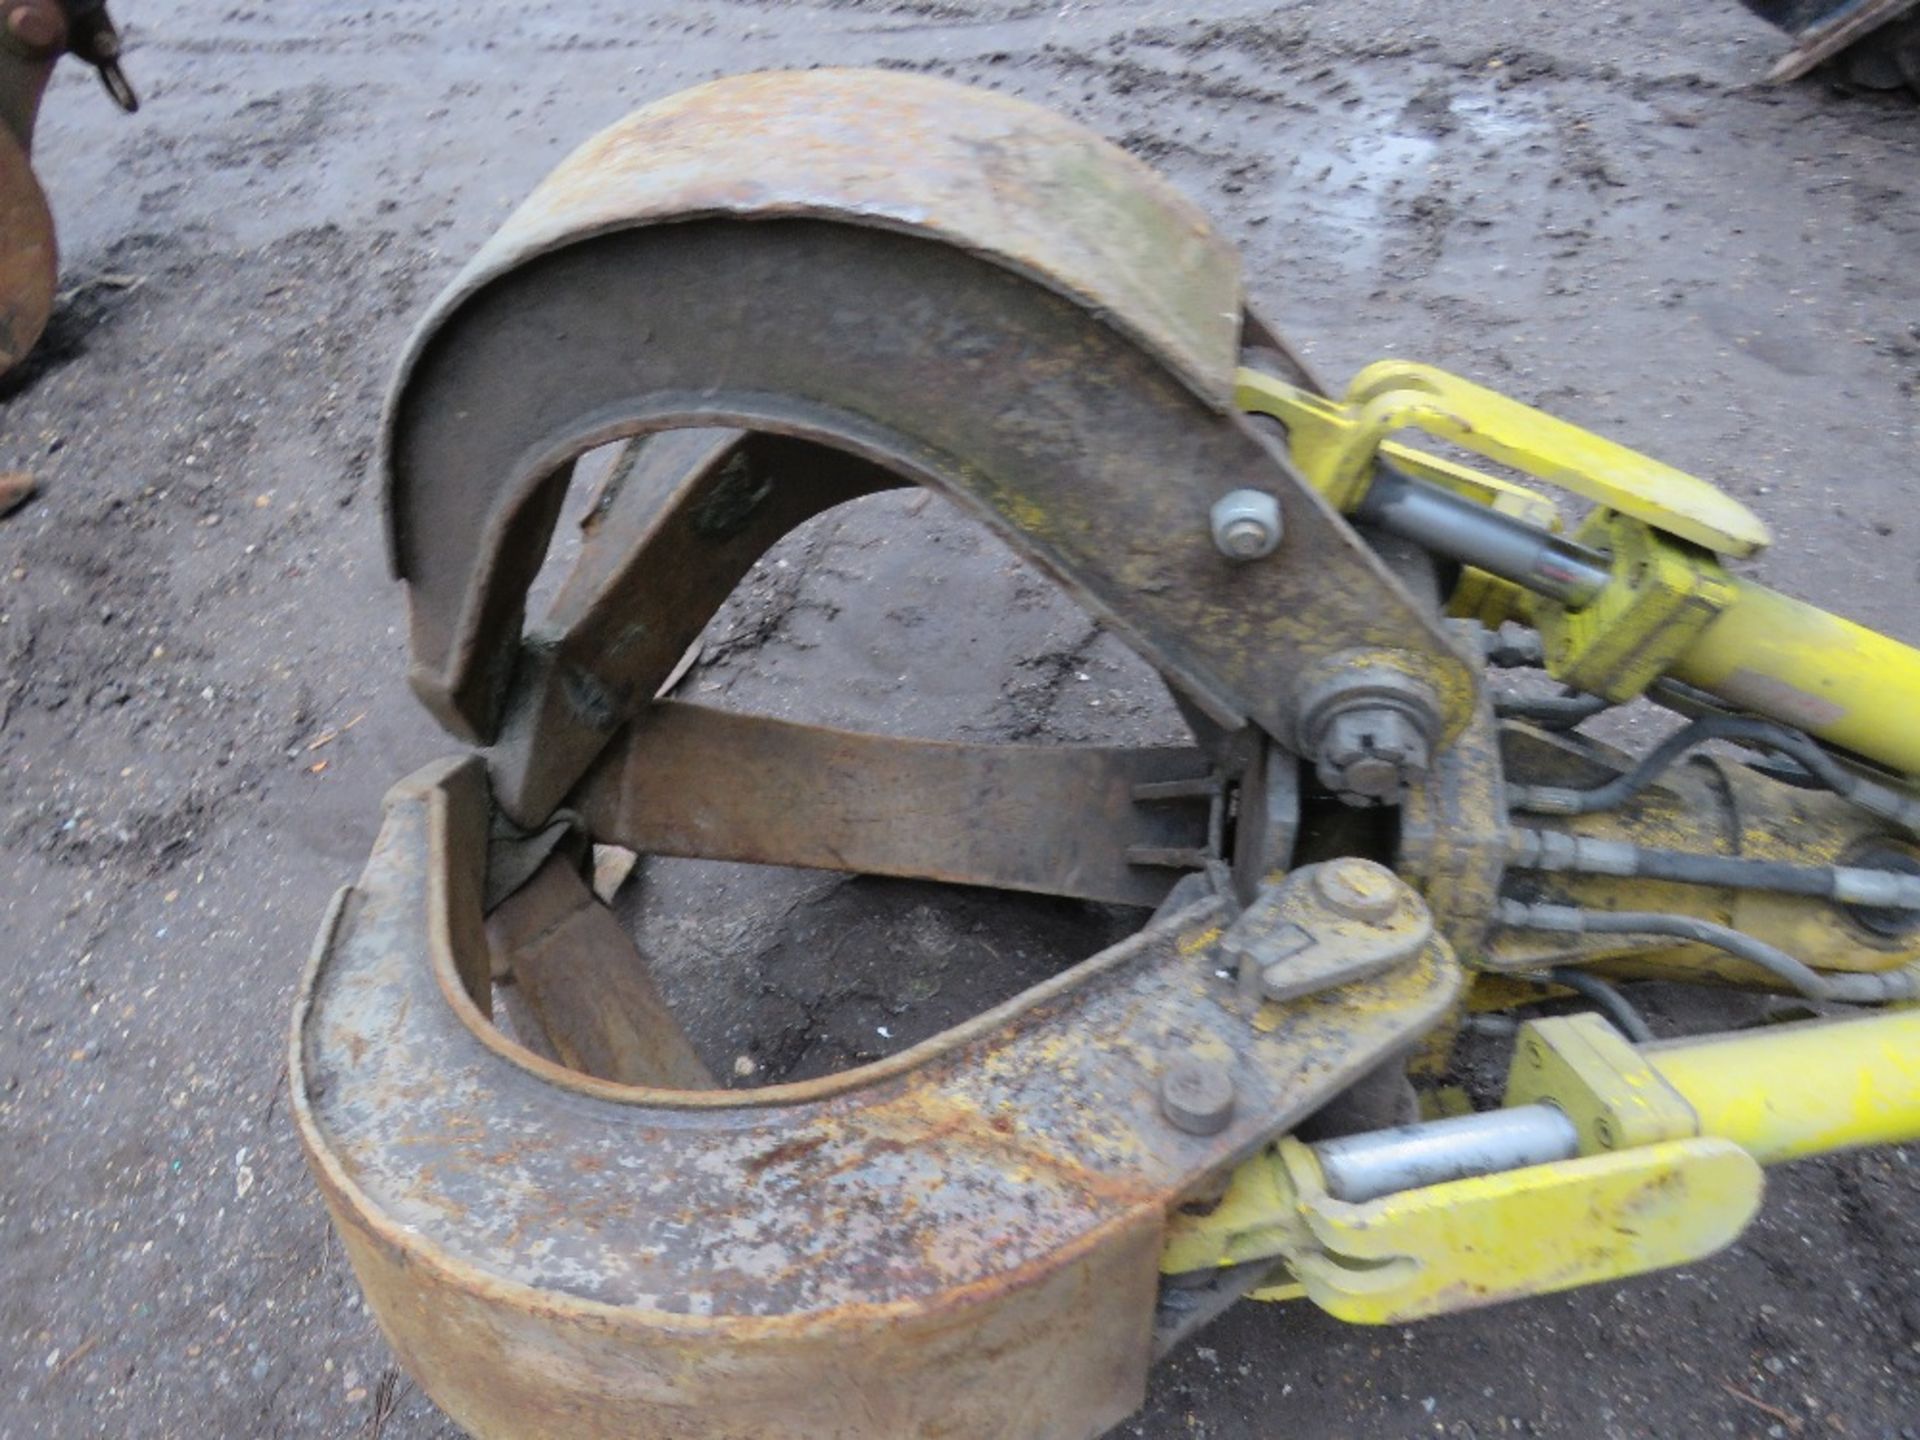 EXCAVATOR MOUNTED 5 TINE SCRAP GRAB WITH ROTATOR ON 65MM PINS, RAMS DONE LITTLE WORK SINCE REFURBISH - Image 5 of 6